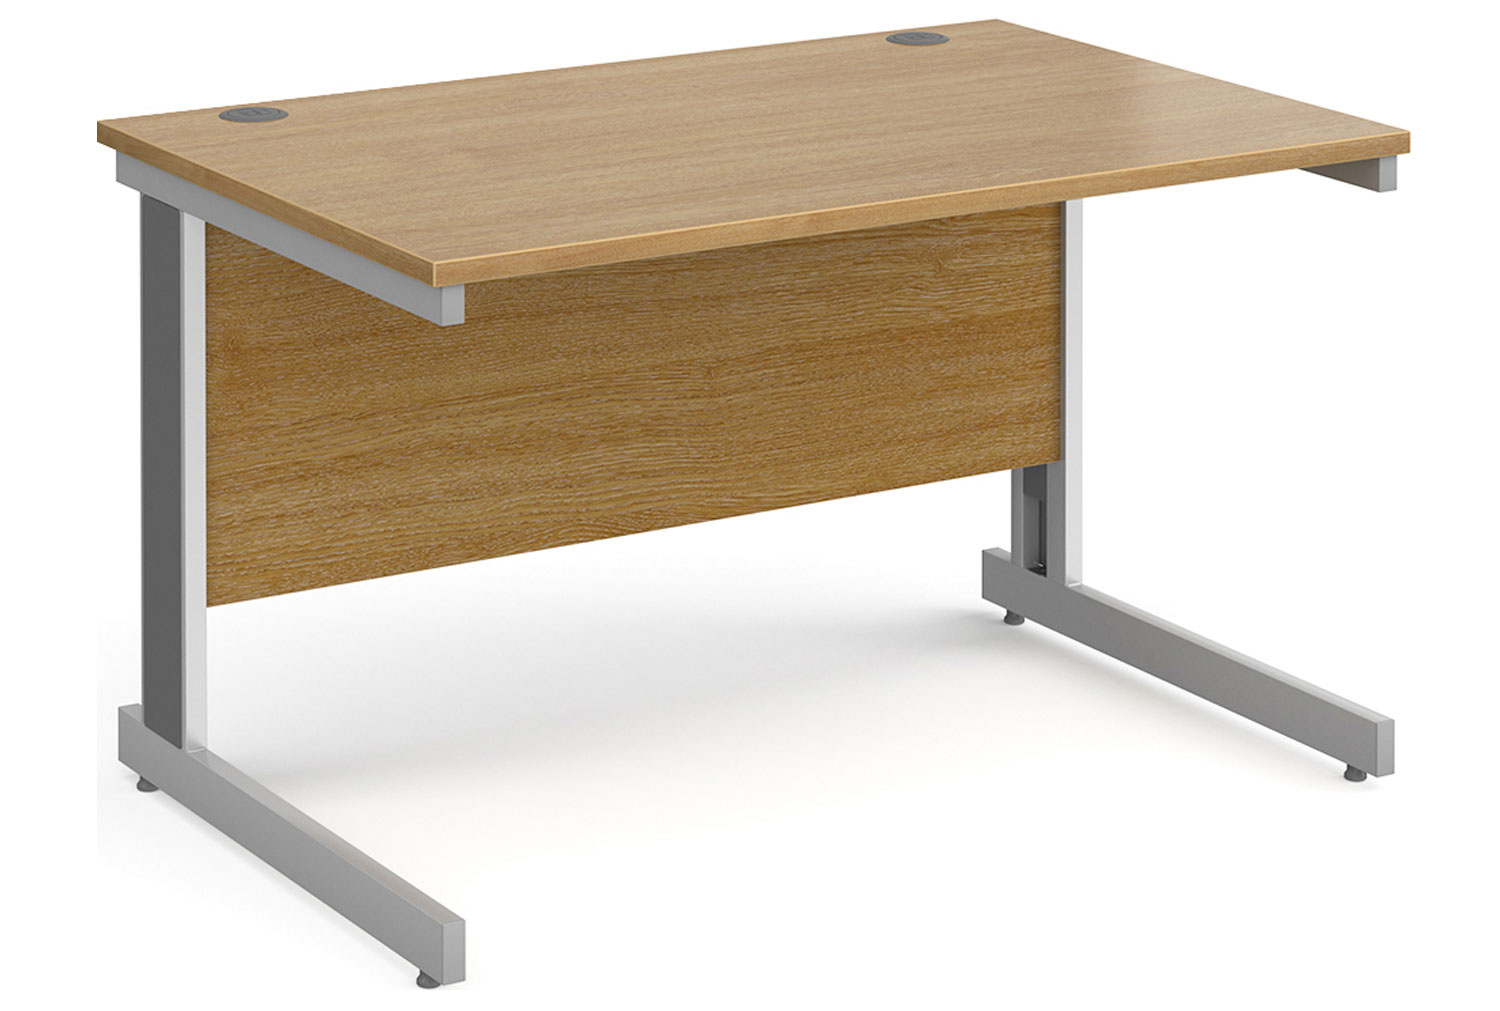 All Oak Deluxe Rectangular Office Desk, 120wx80dx73h (cm), Express Delivery